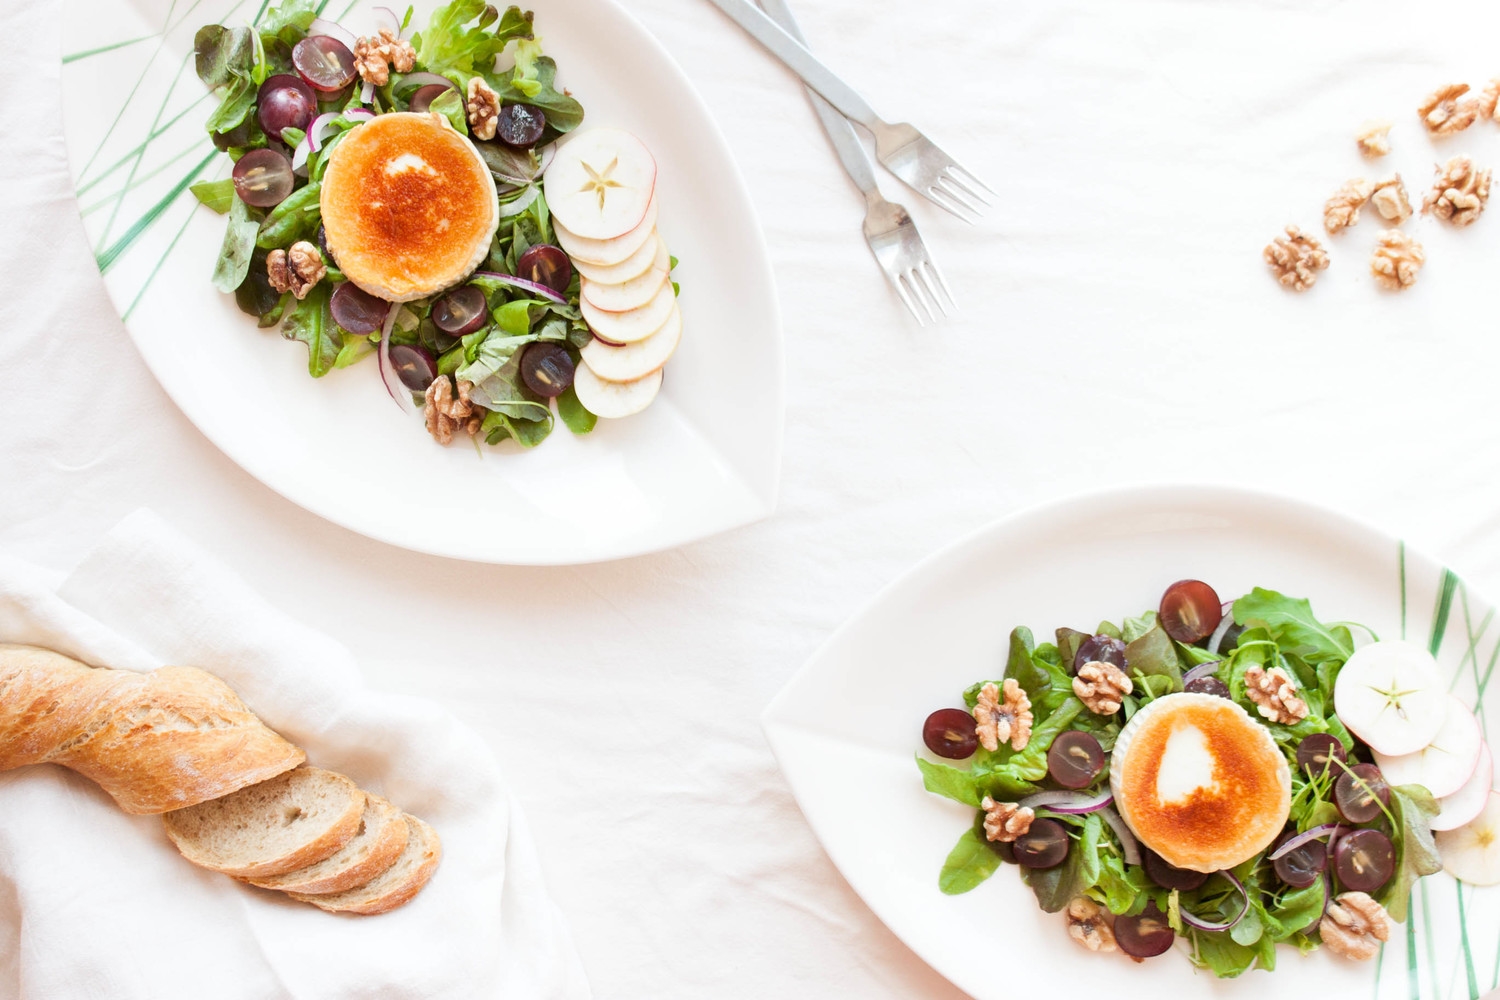 Warm Chèvre Salad with Grapes, Heirloom Apples, & Walnuts | My Blue&White Kitchen